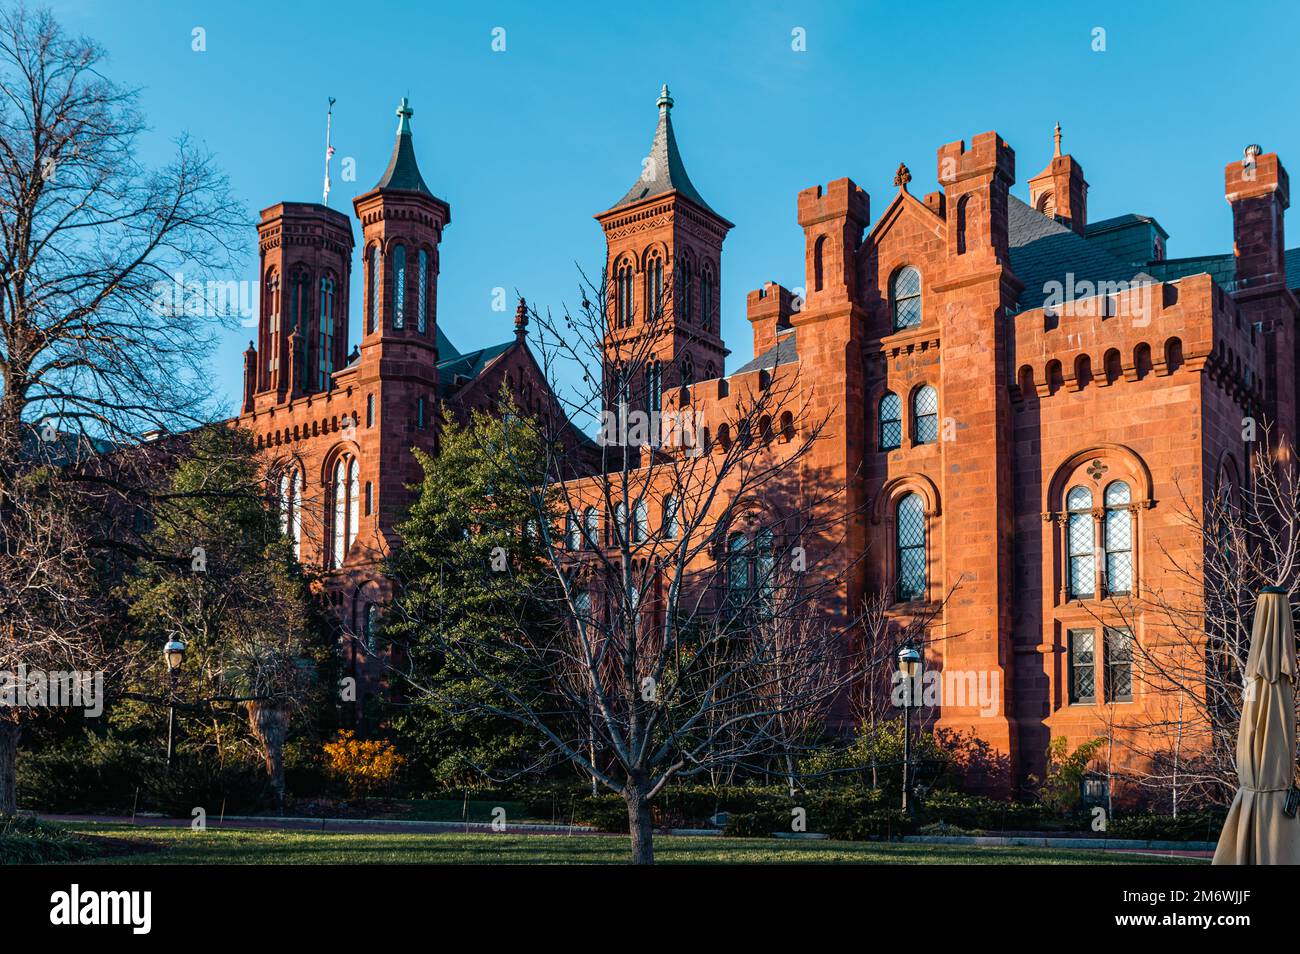 Sunny day shot of the side view of the Smithsonian Castle. It houses the Smithsonian Institution’s administrative offices and information center. Stock Photo